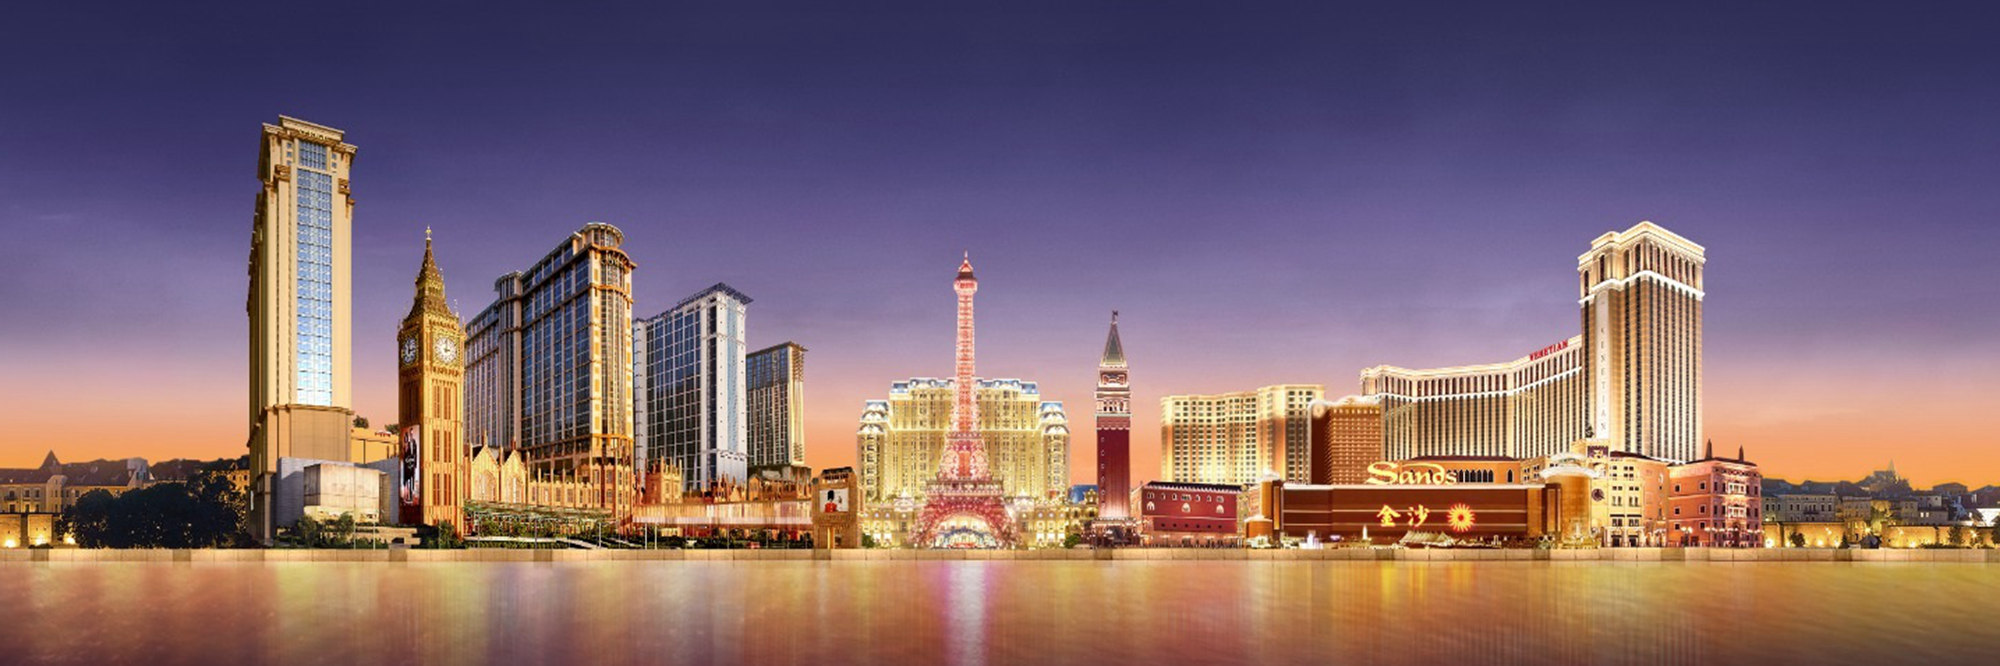 About Sands Resorts Cotai Strip Macao